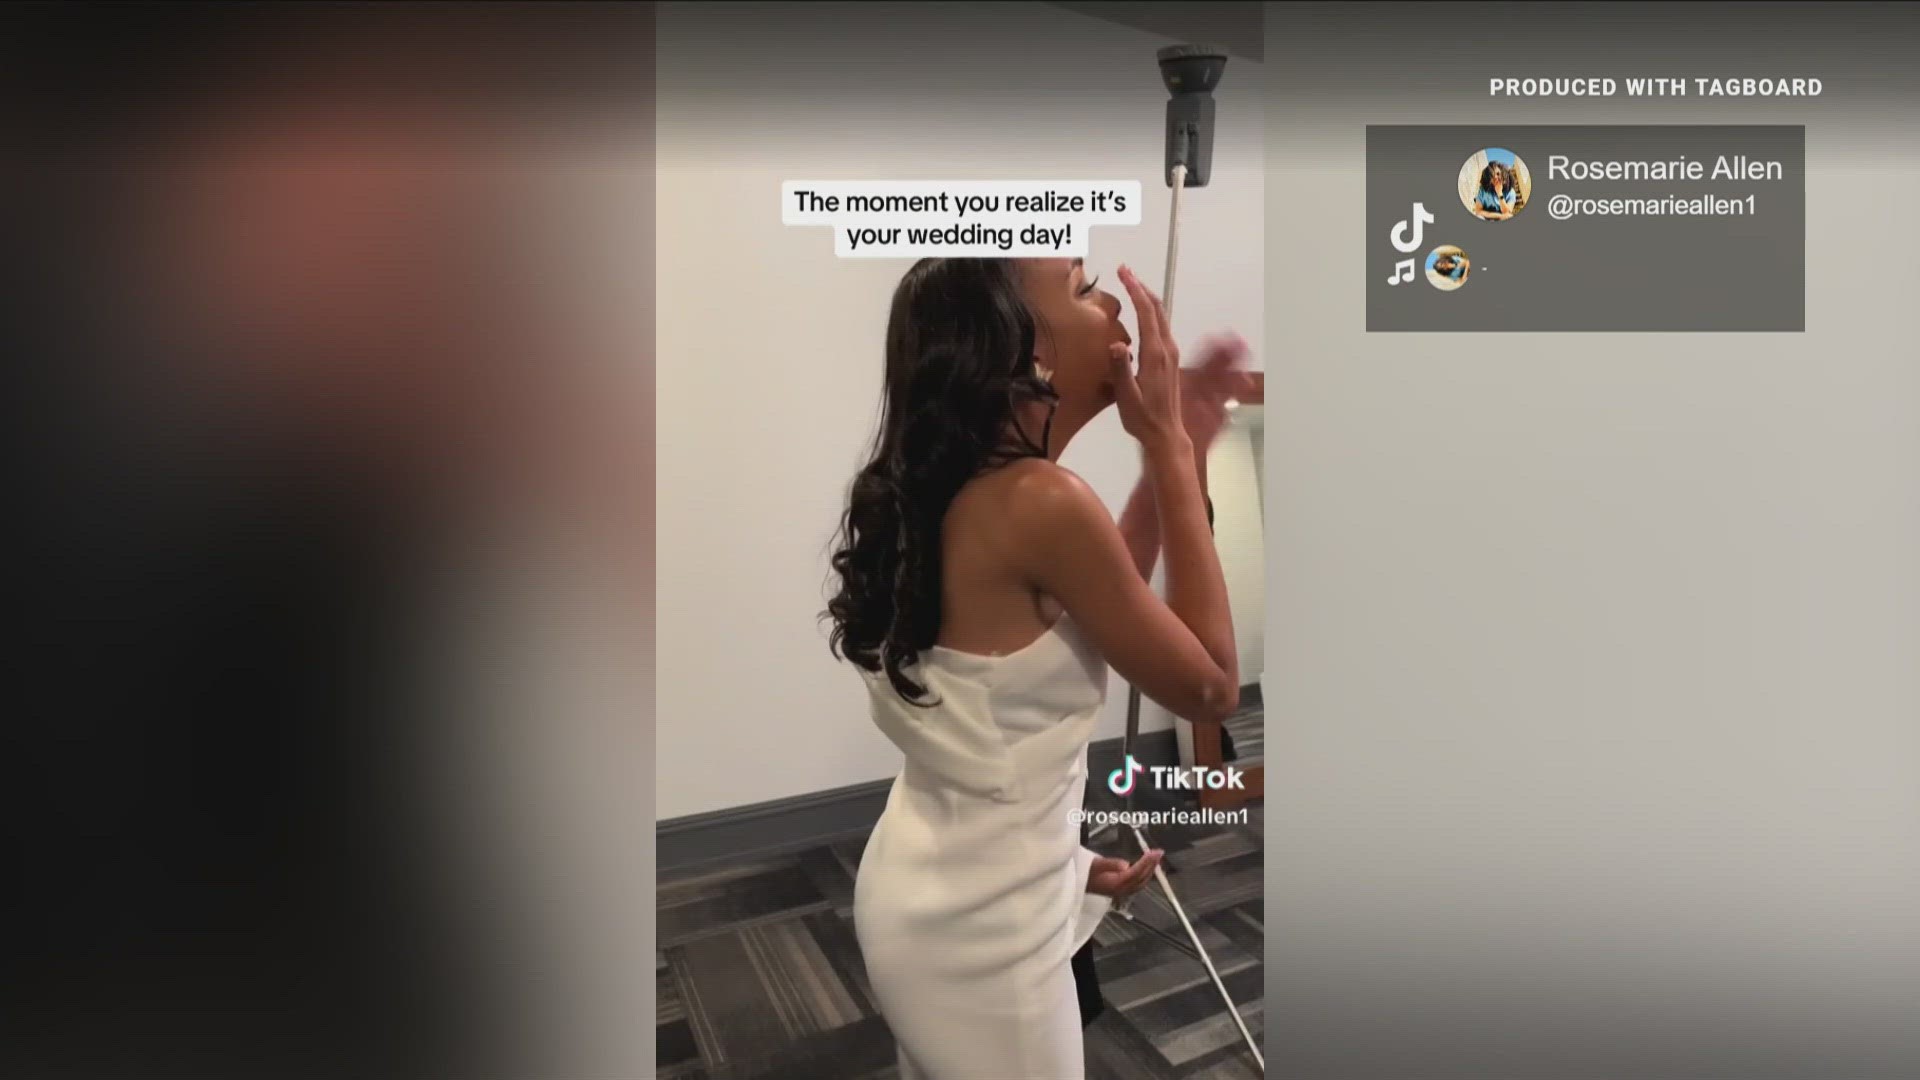 Dr. Rosemarie Allen discusses a viral TikTok video she recently posted of an engagement and surprise wedding for her niece.